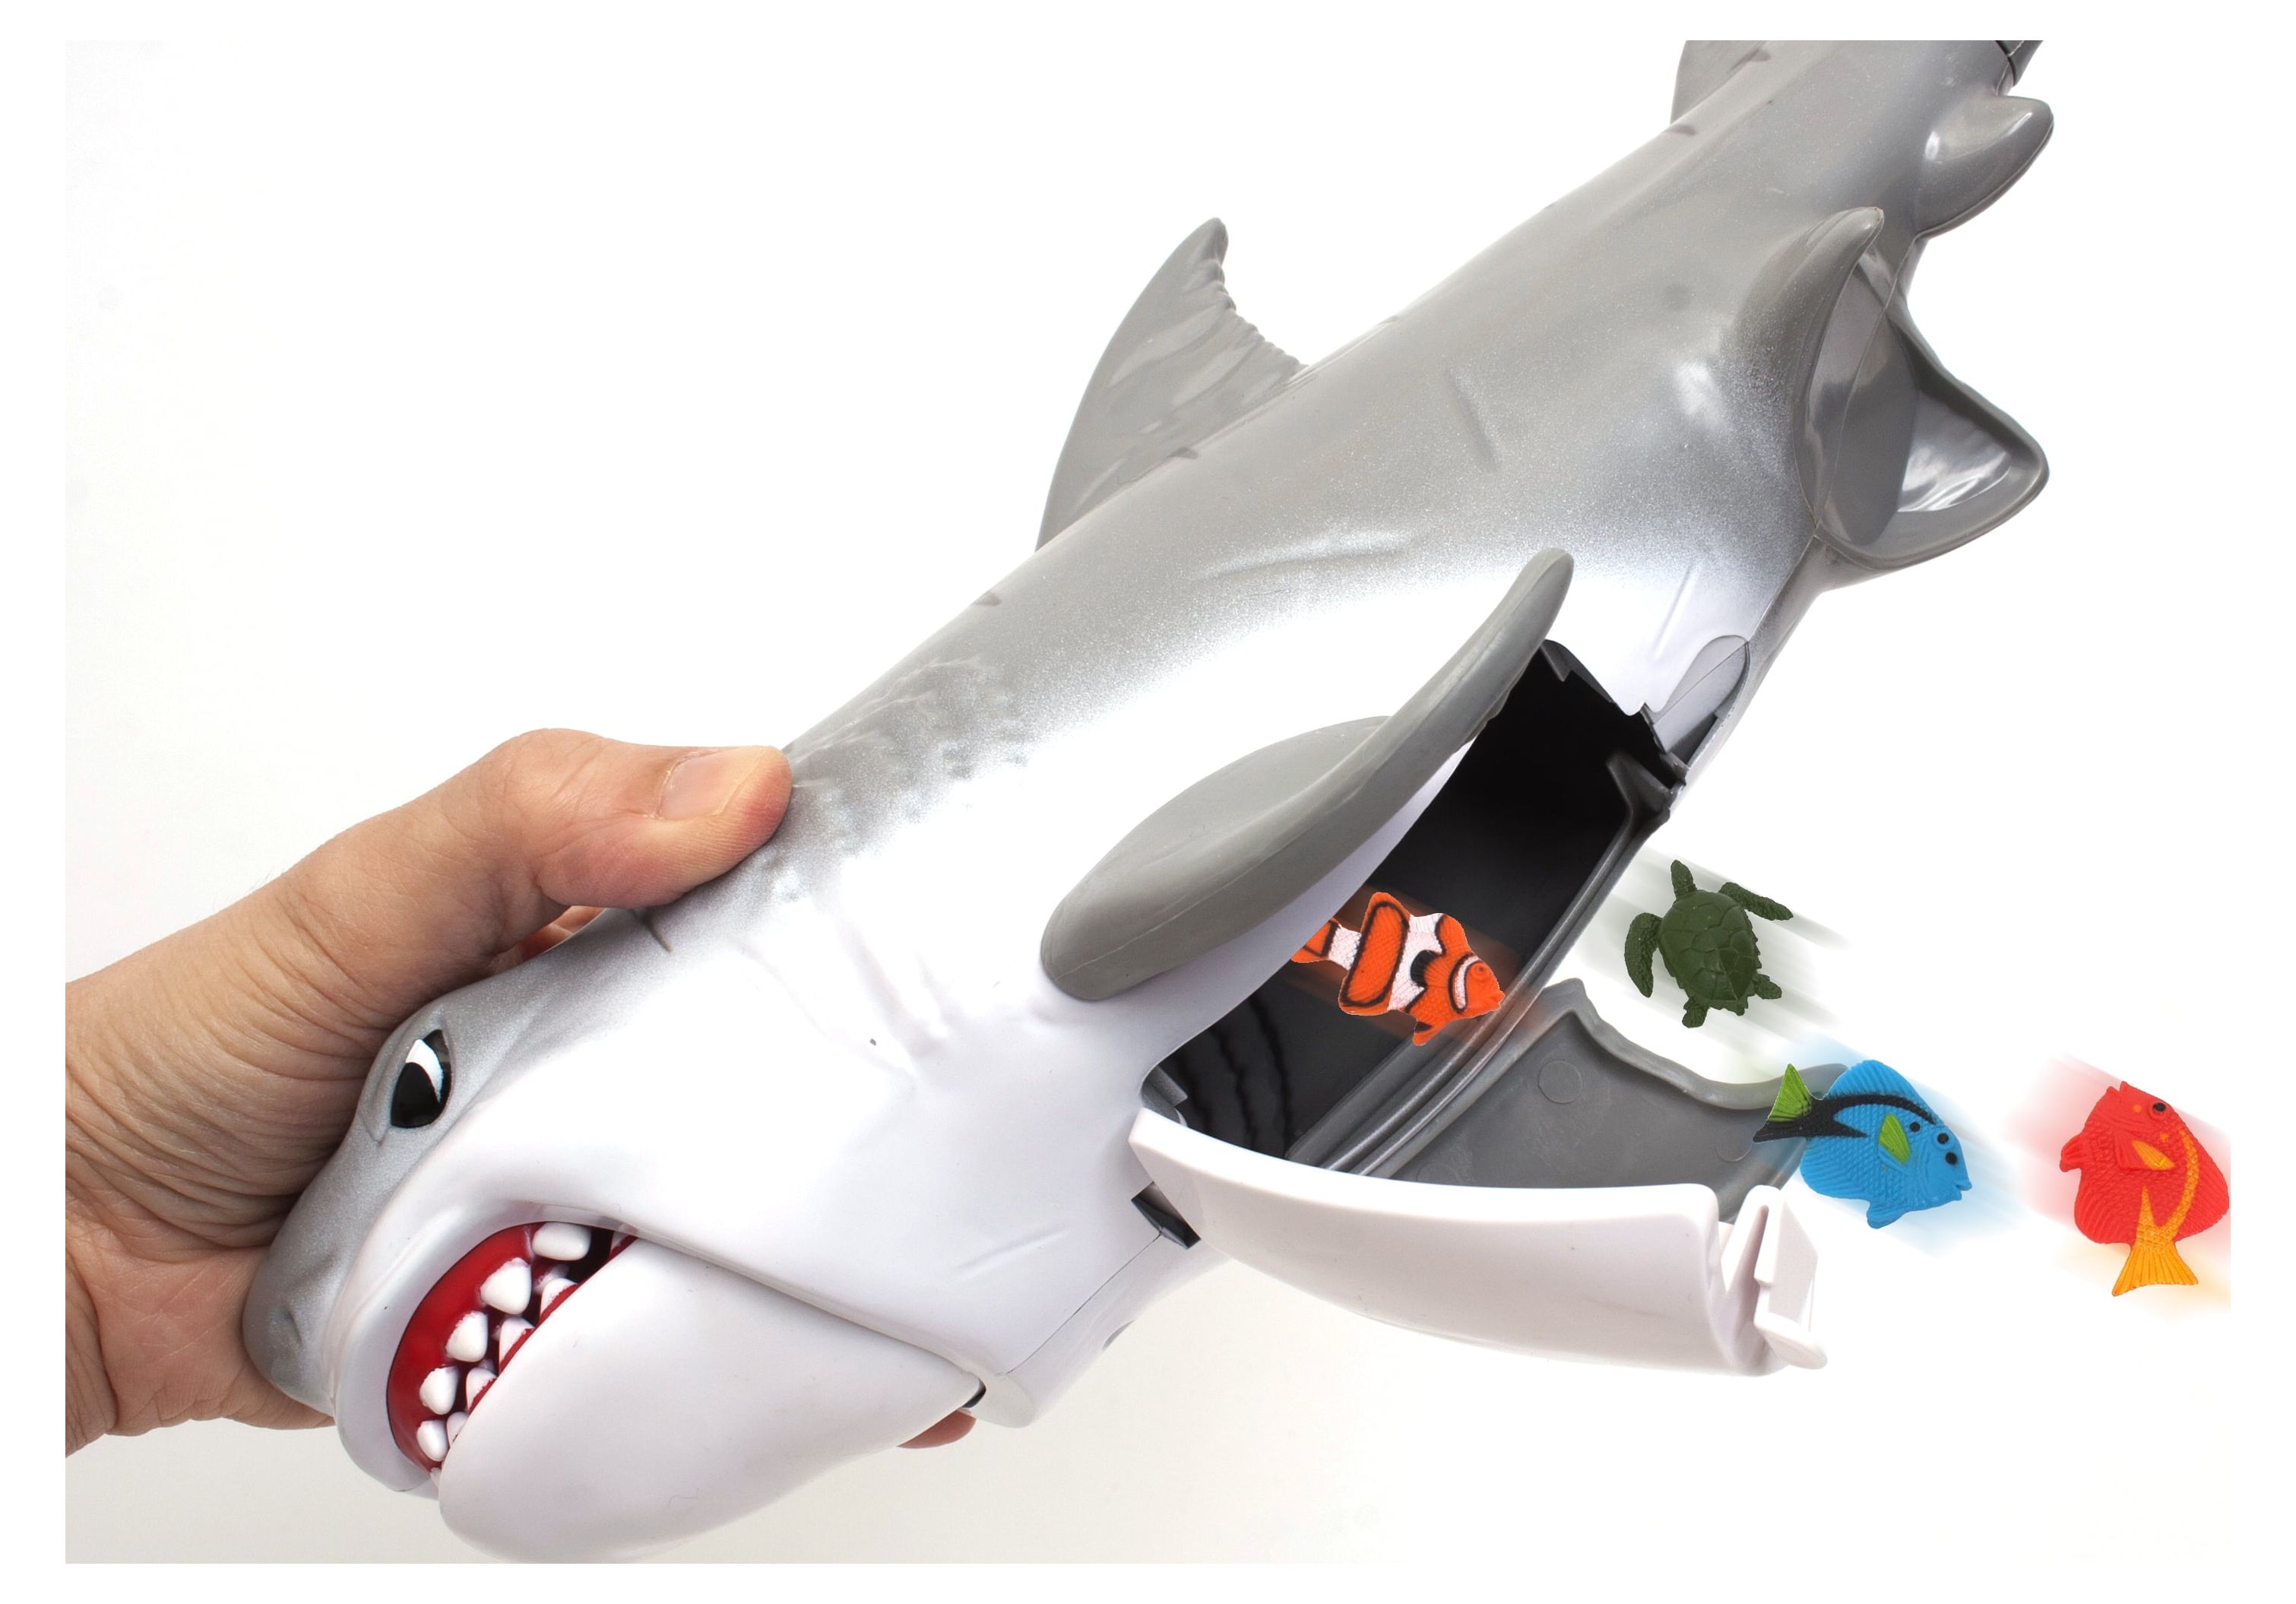 Adventure Force Crunch & Carry Shark Toy, 5 Pieces - image 4 of 5